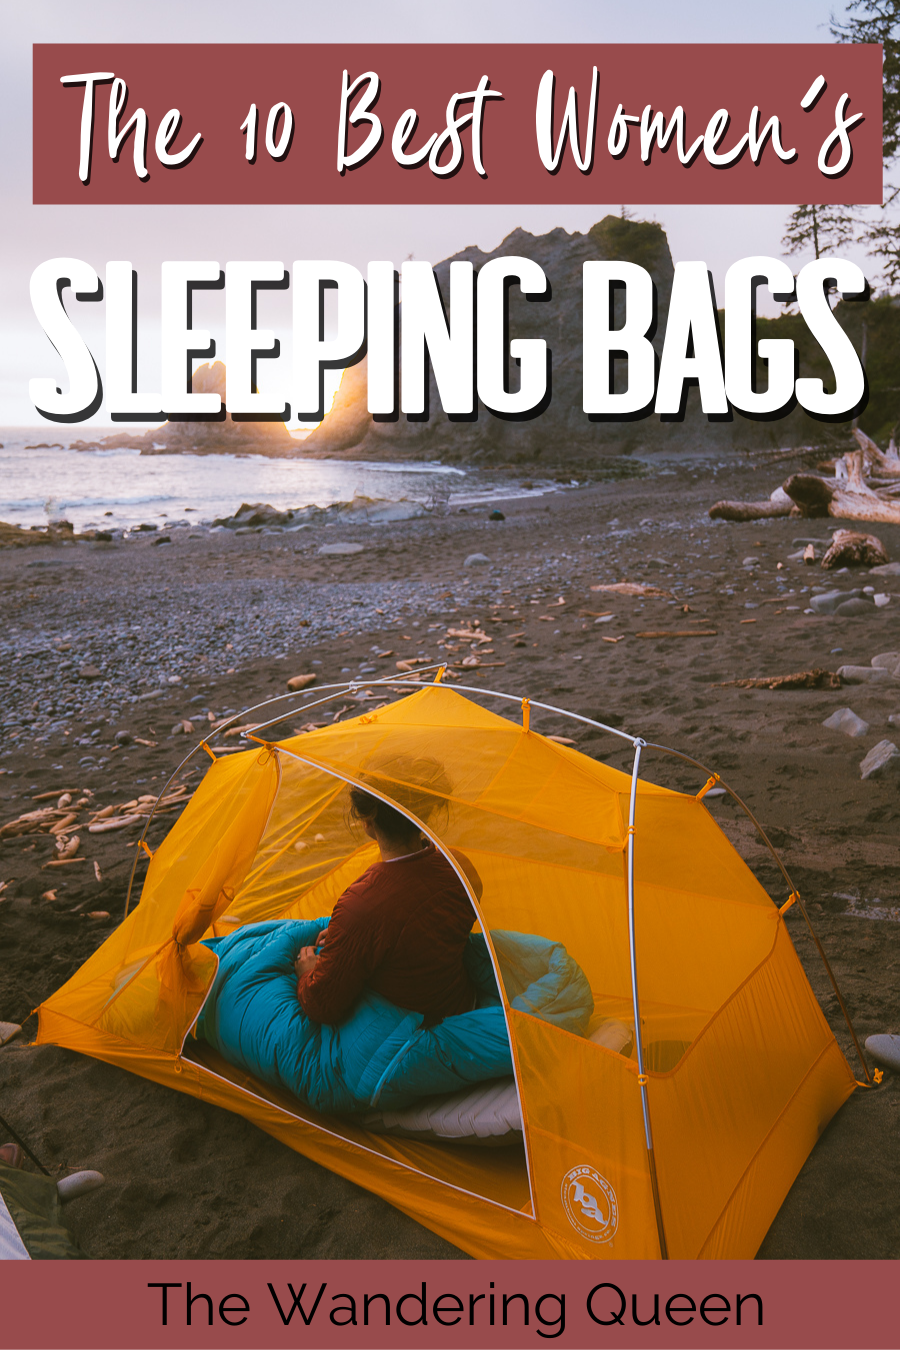 You May Have Bought Your Last Women's Sleeping Bag - Backpacker